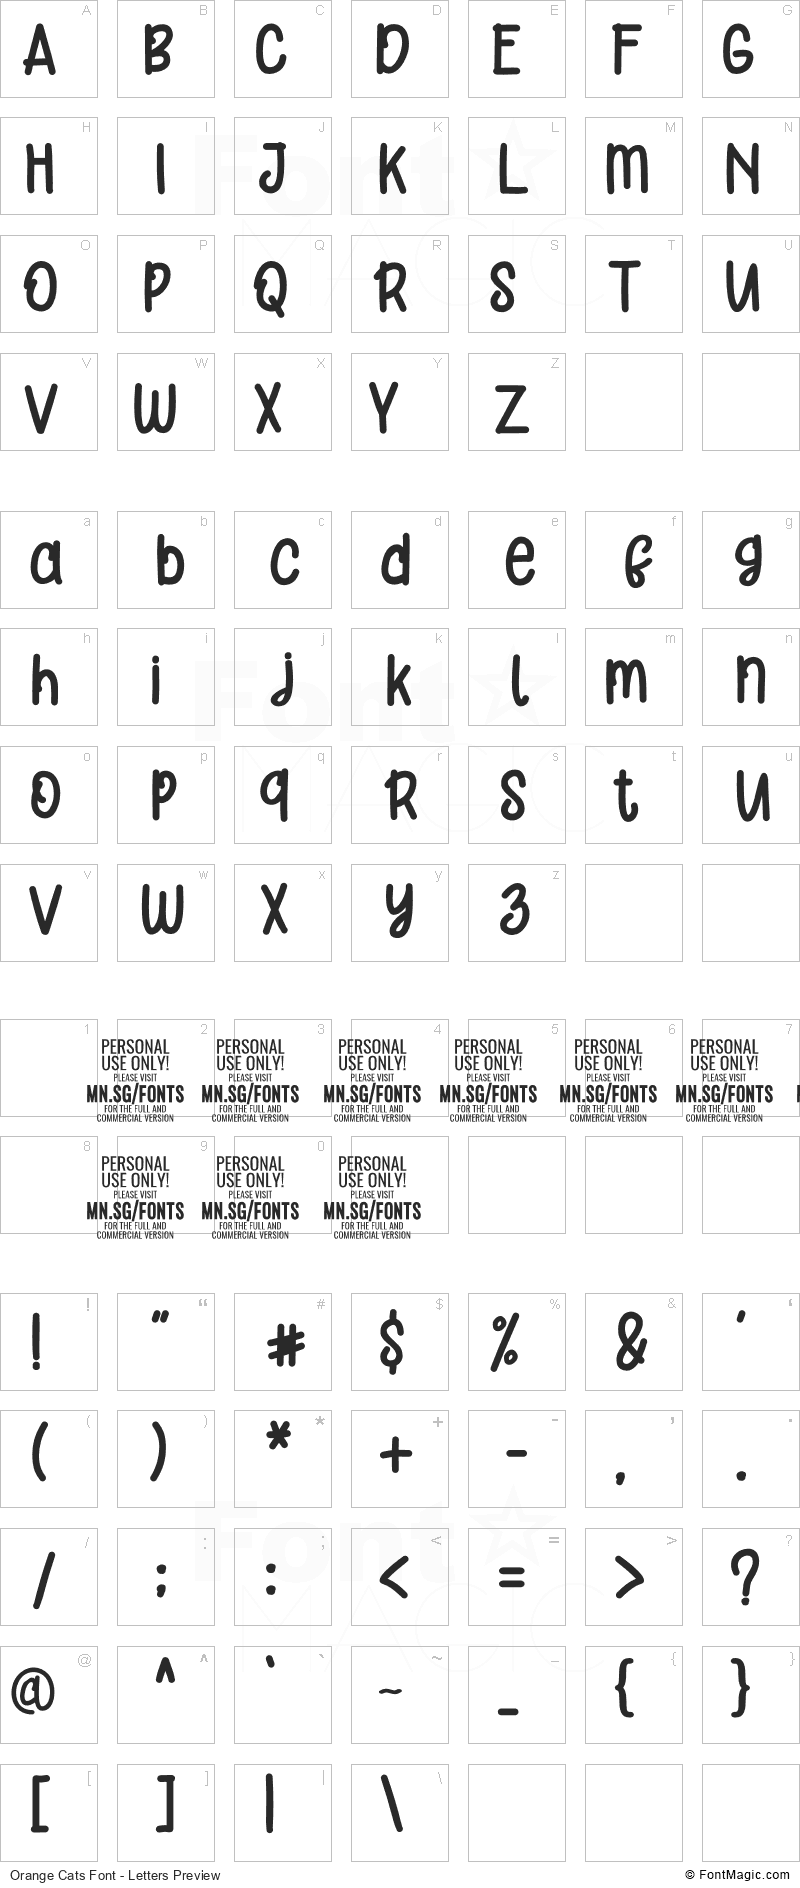 Orange Cats Font - All Latters Preview Chart